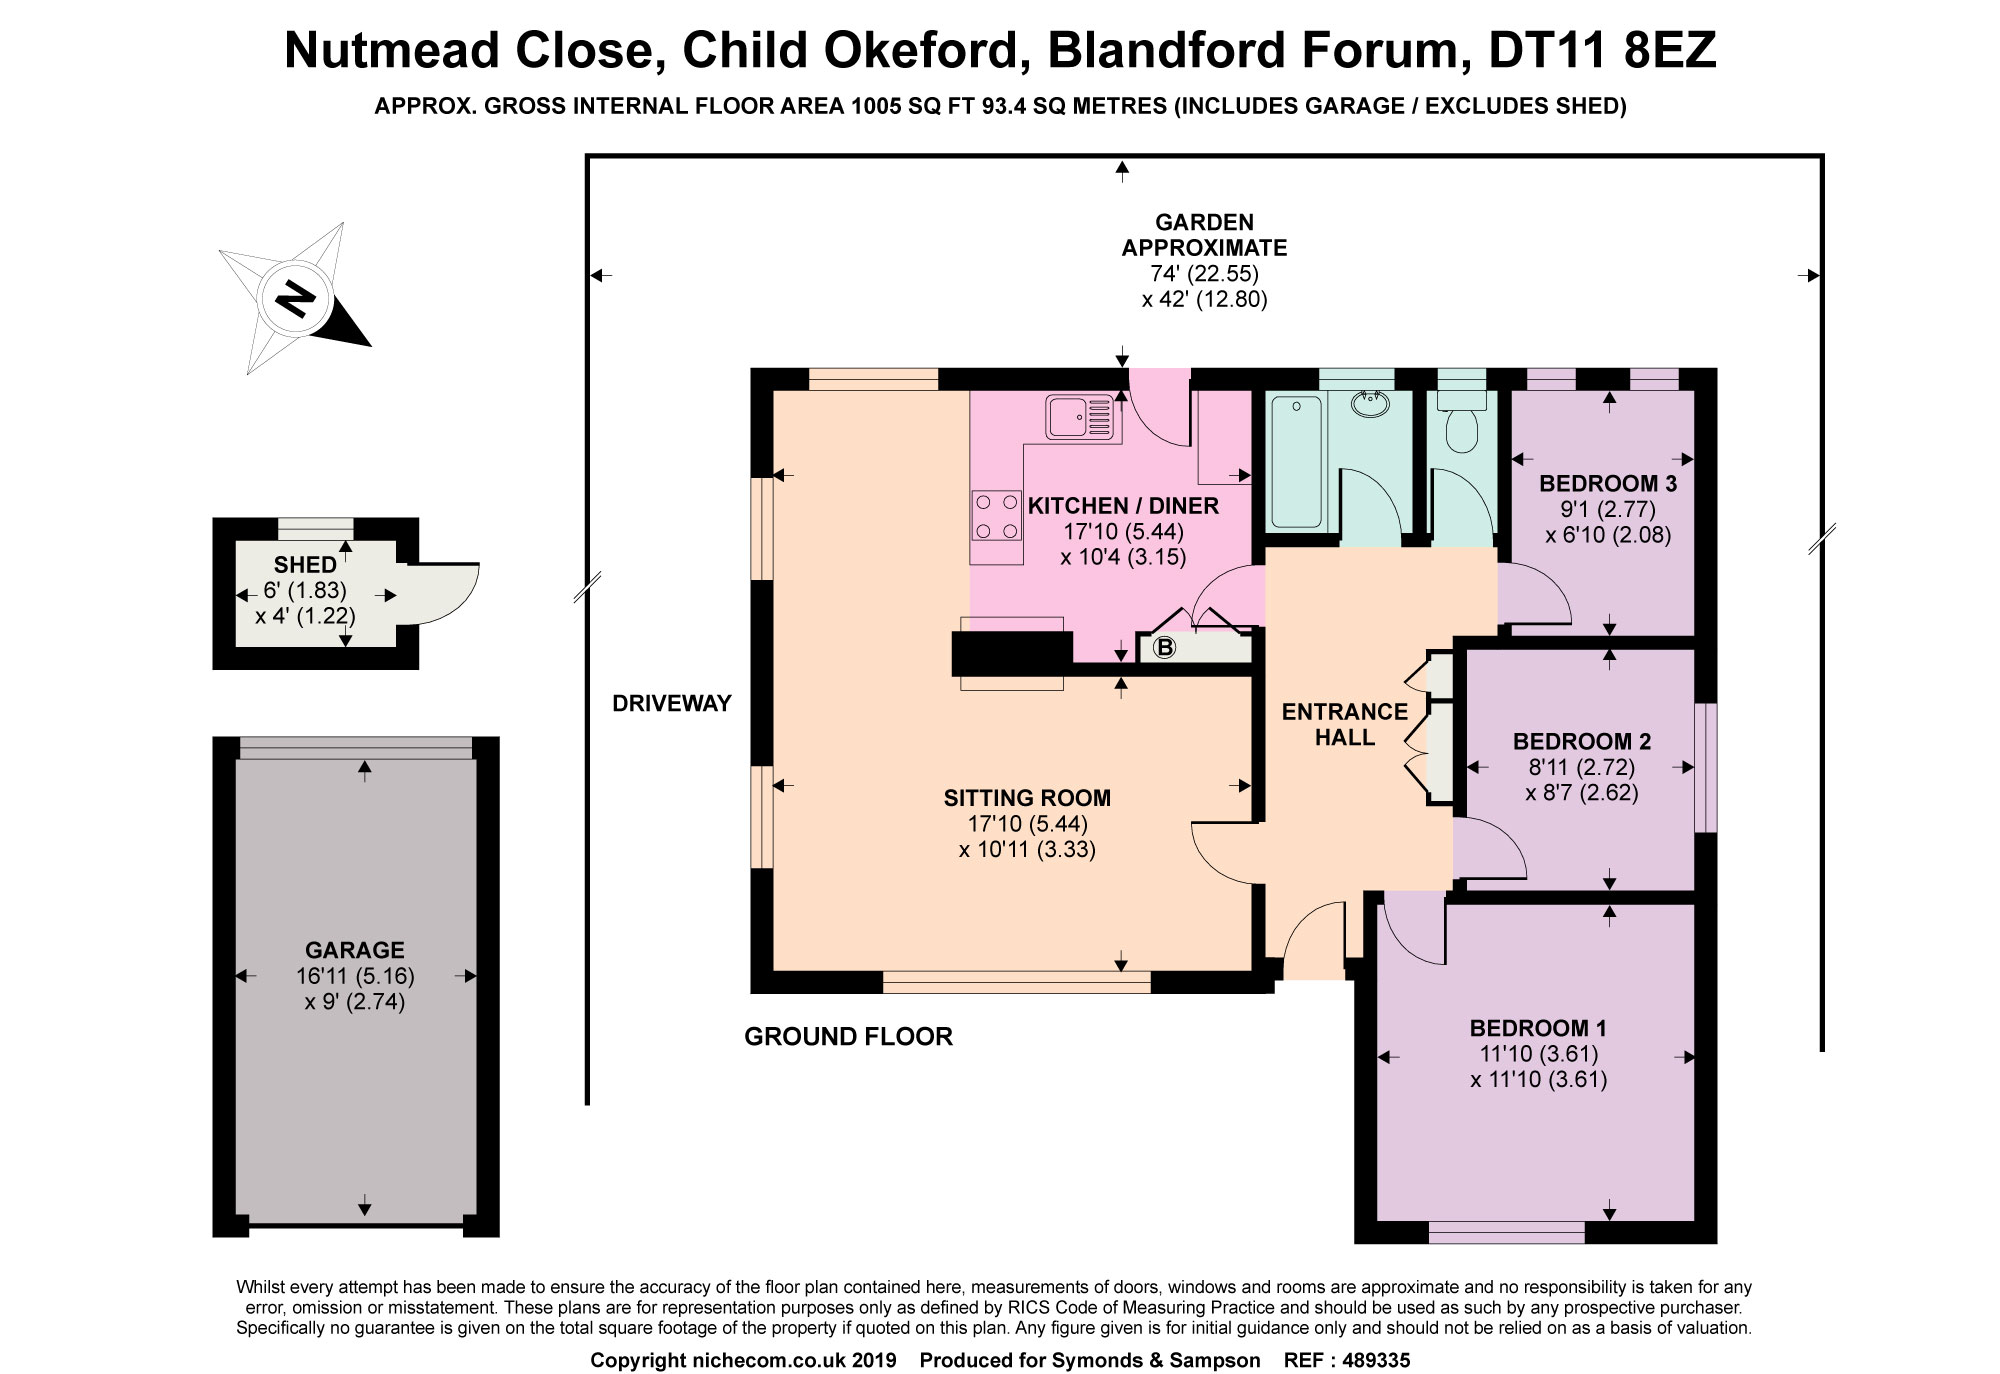 3 Bedrooms Detached bungalow for sale in Nutmead Close, Child Okeford, Blandford Forum DT11